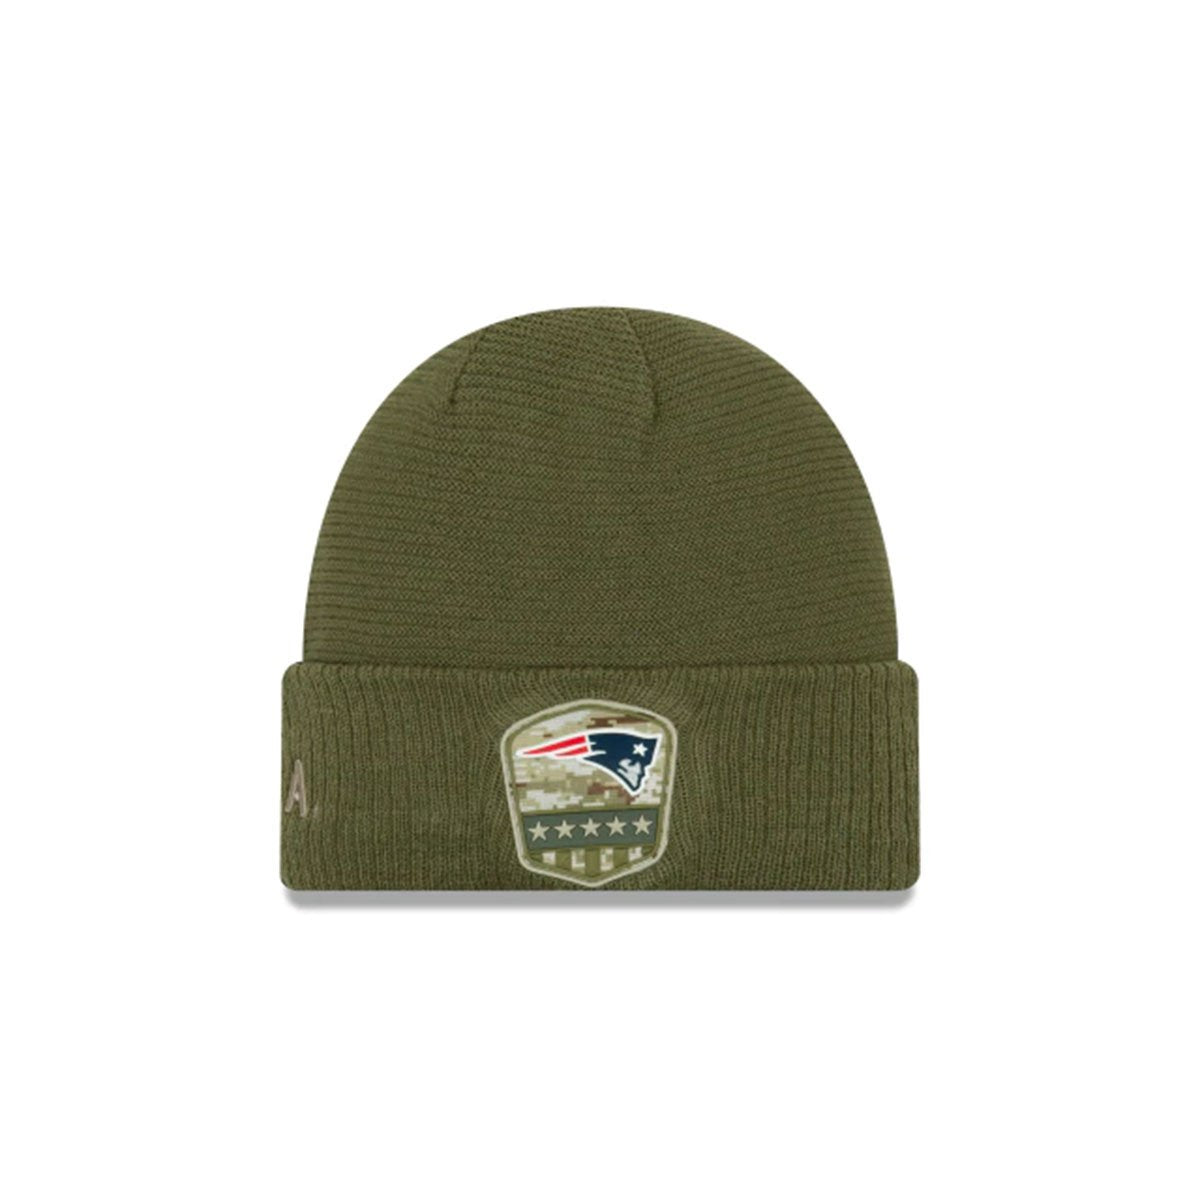 NEW ENGLAND PATRIOTS SALUTE TO SERVICE CUFF KNIT GREEN/BLUE